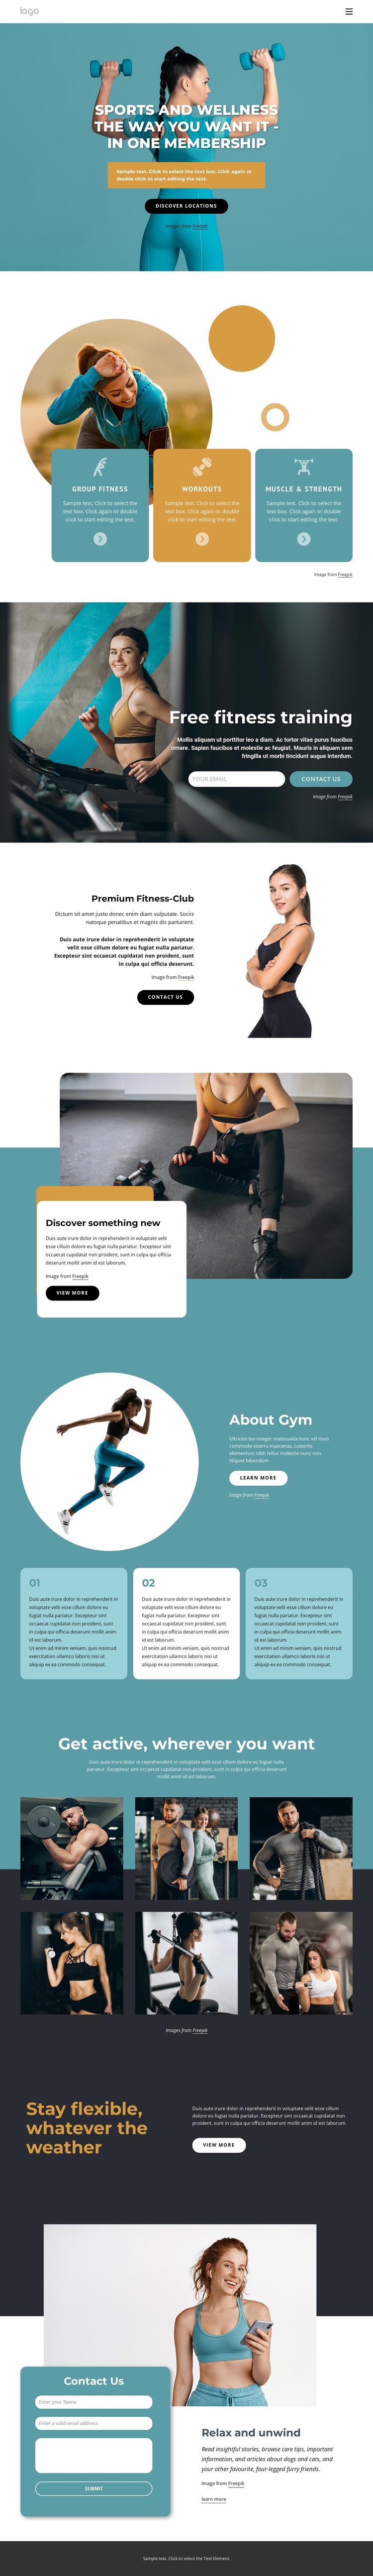 Workout anywhere with one membership Website Mockup